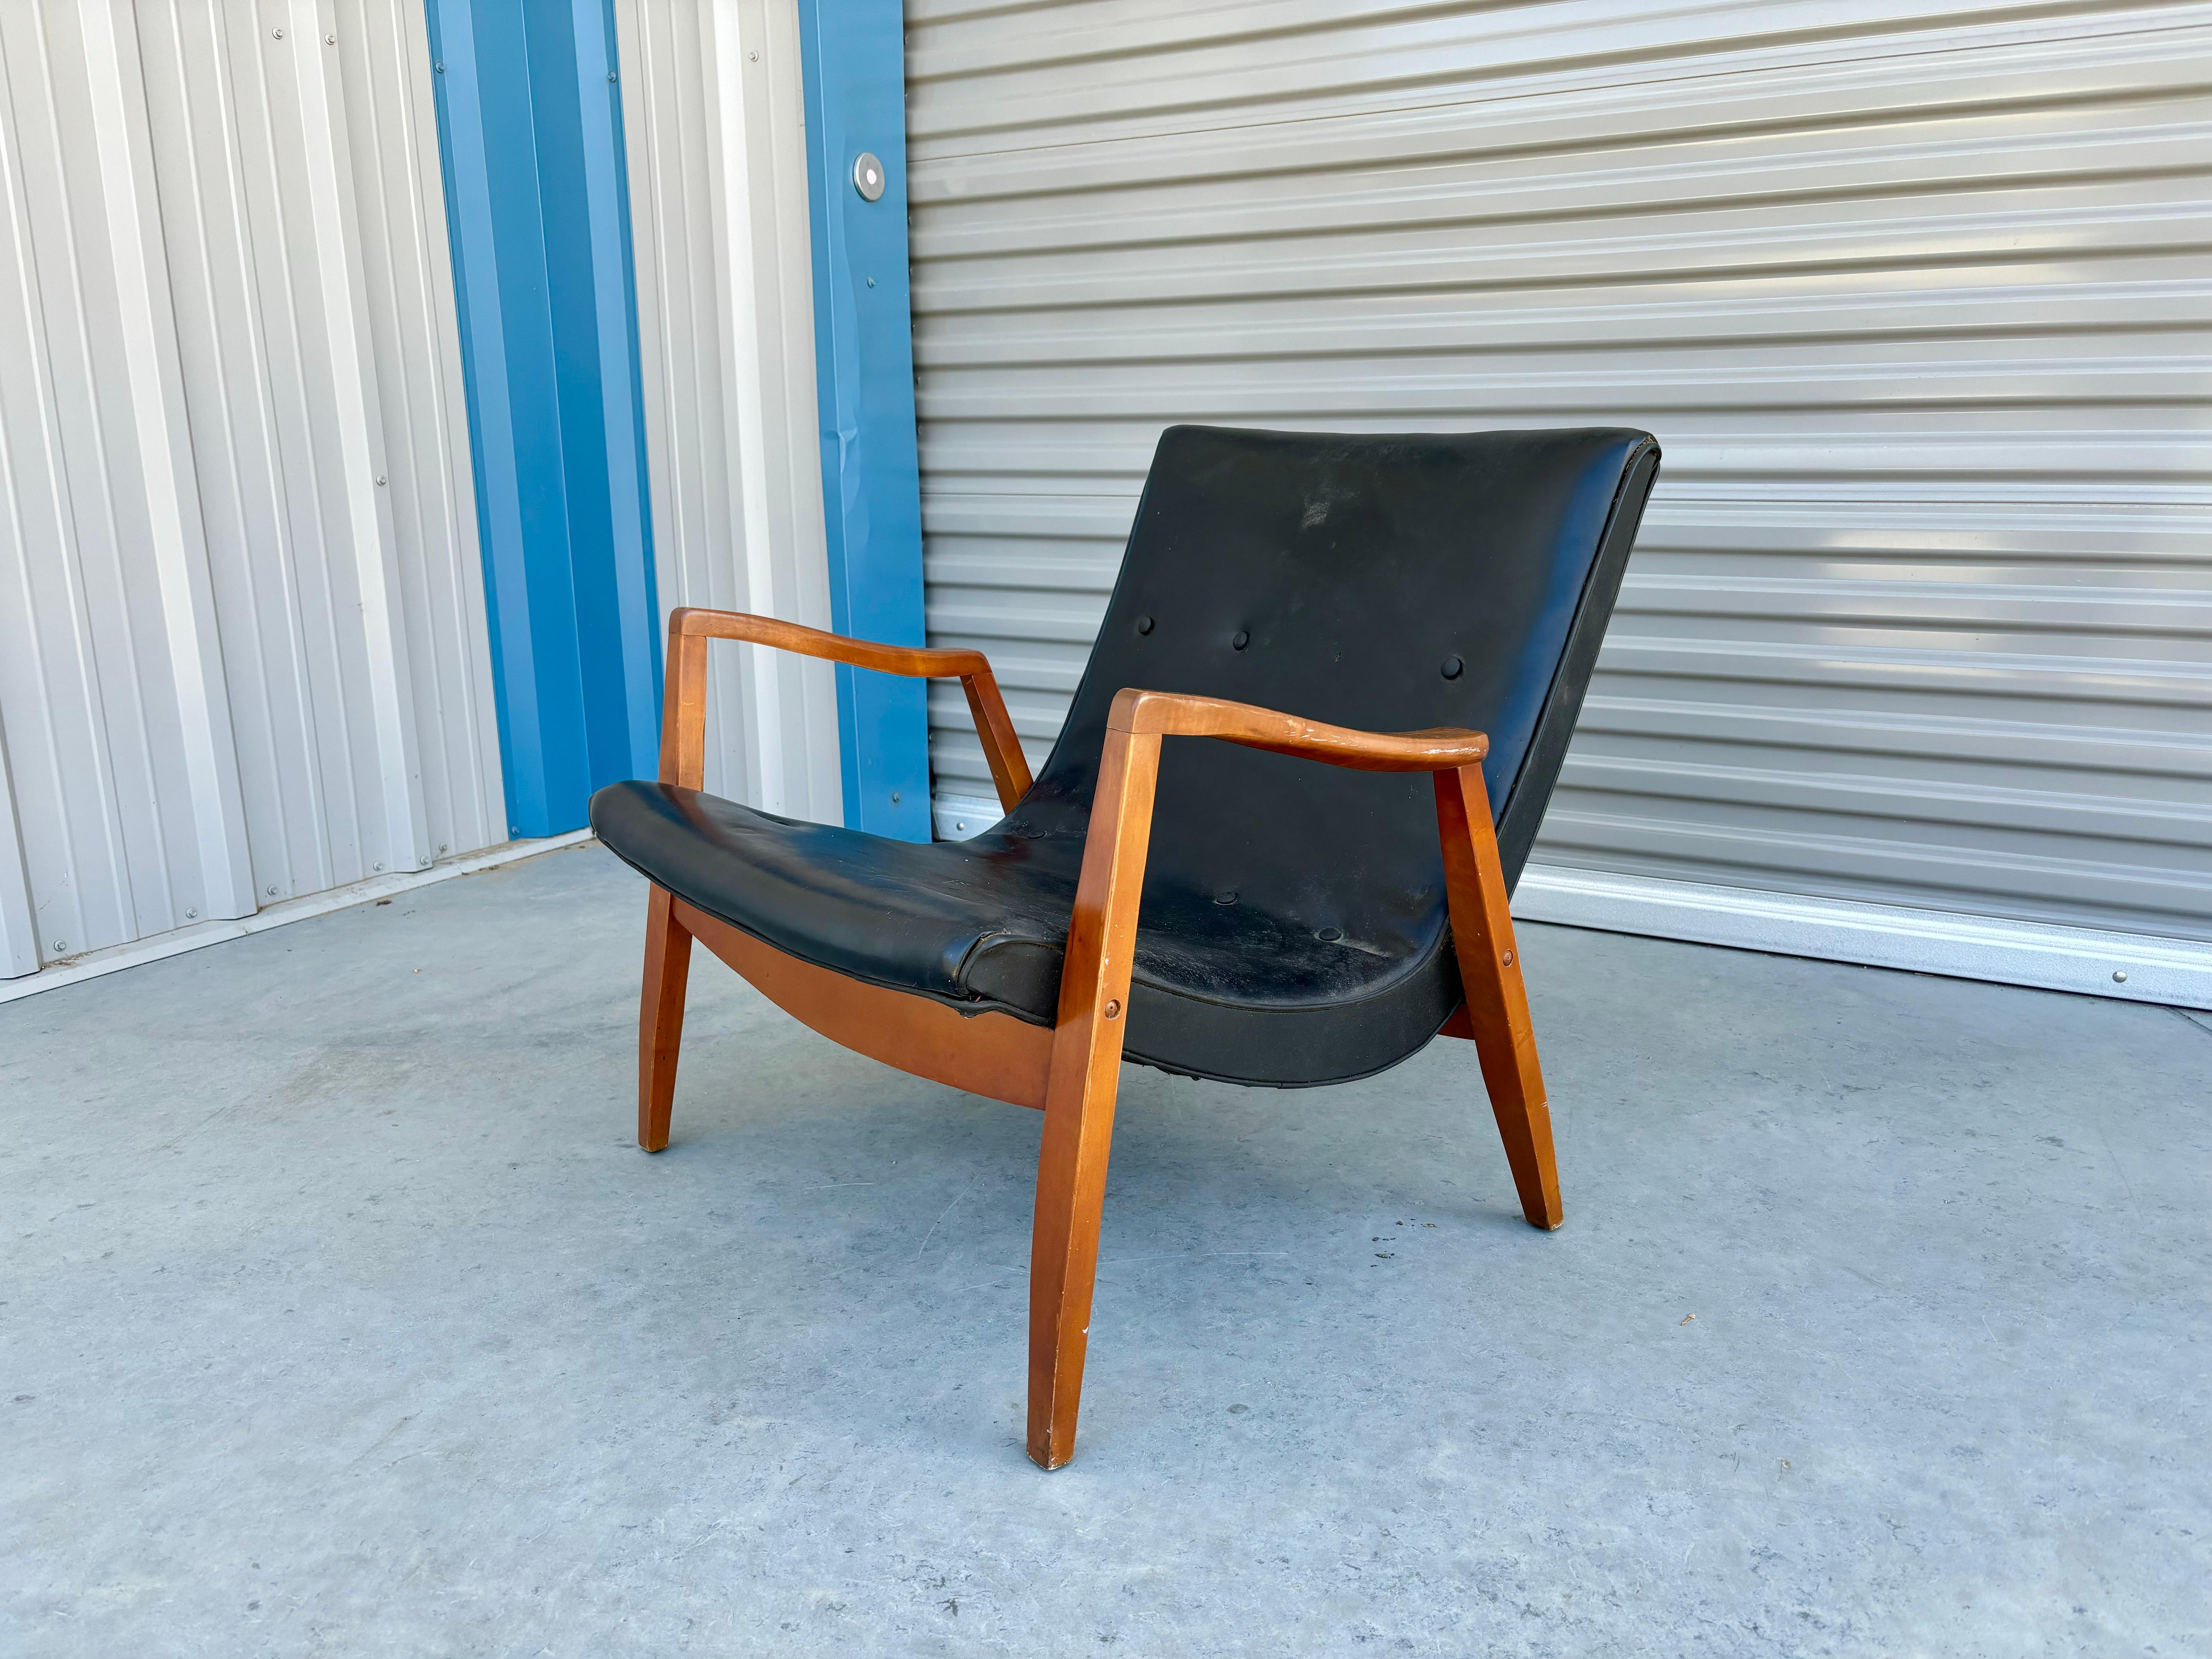 This exquisite mid-century scoop lounge chair is a true masterpiece of furniture design, designed and manufactured by Milo Baughman in the United States during the 1960s. The chair features a sleek and sophisticated black leather upholstery that